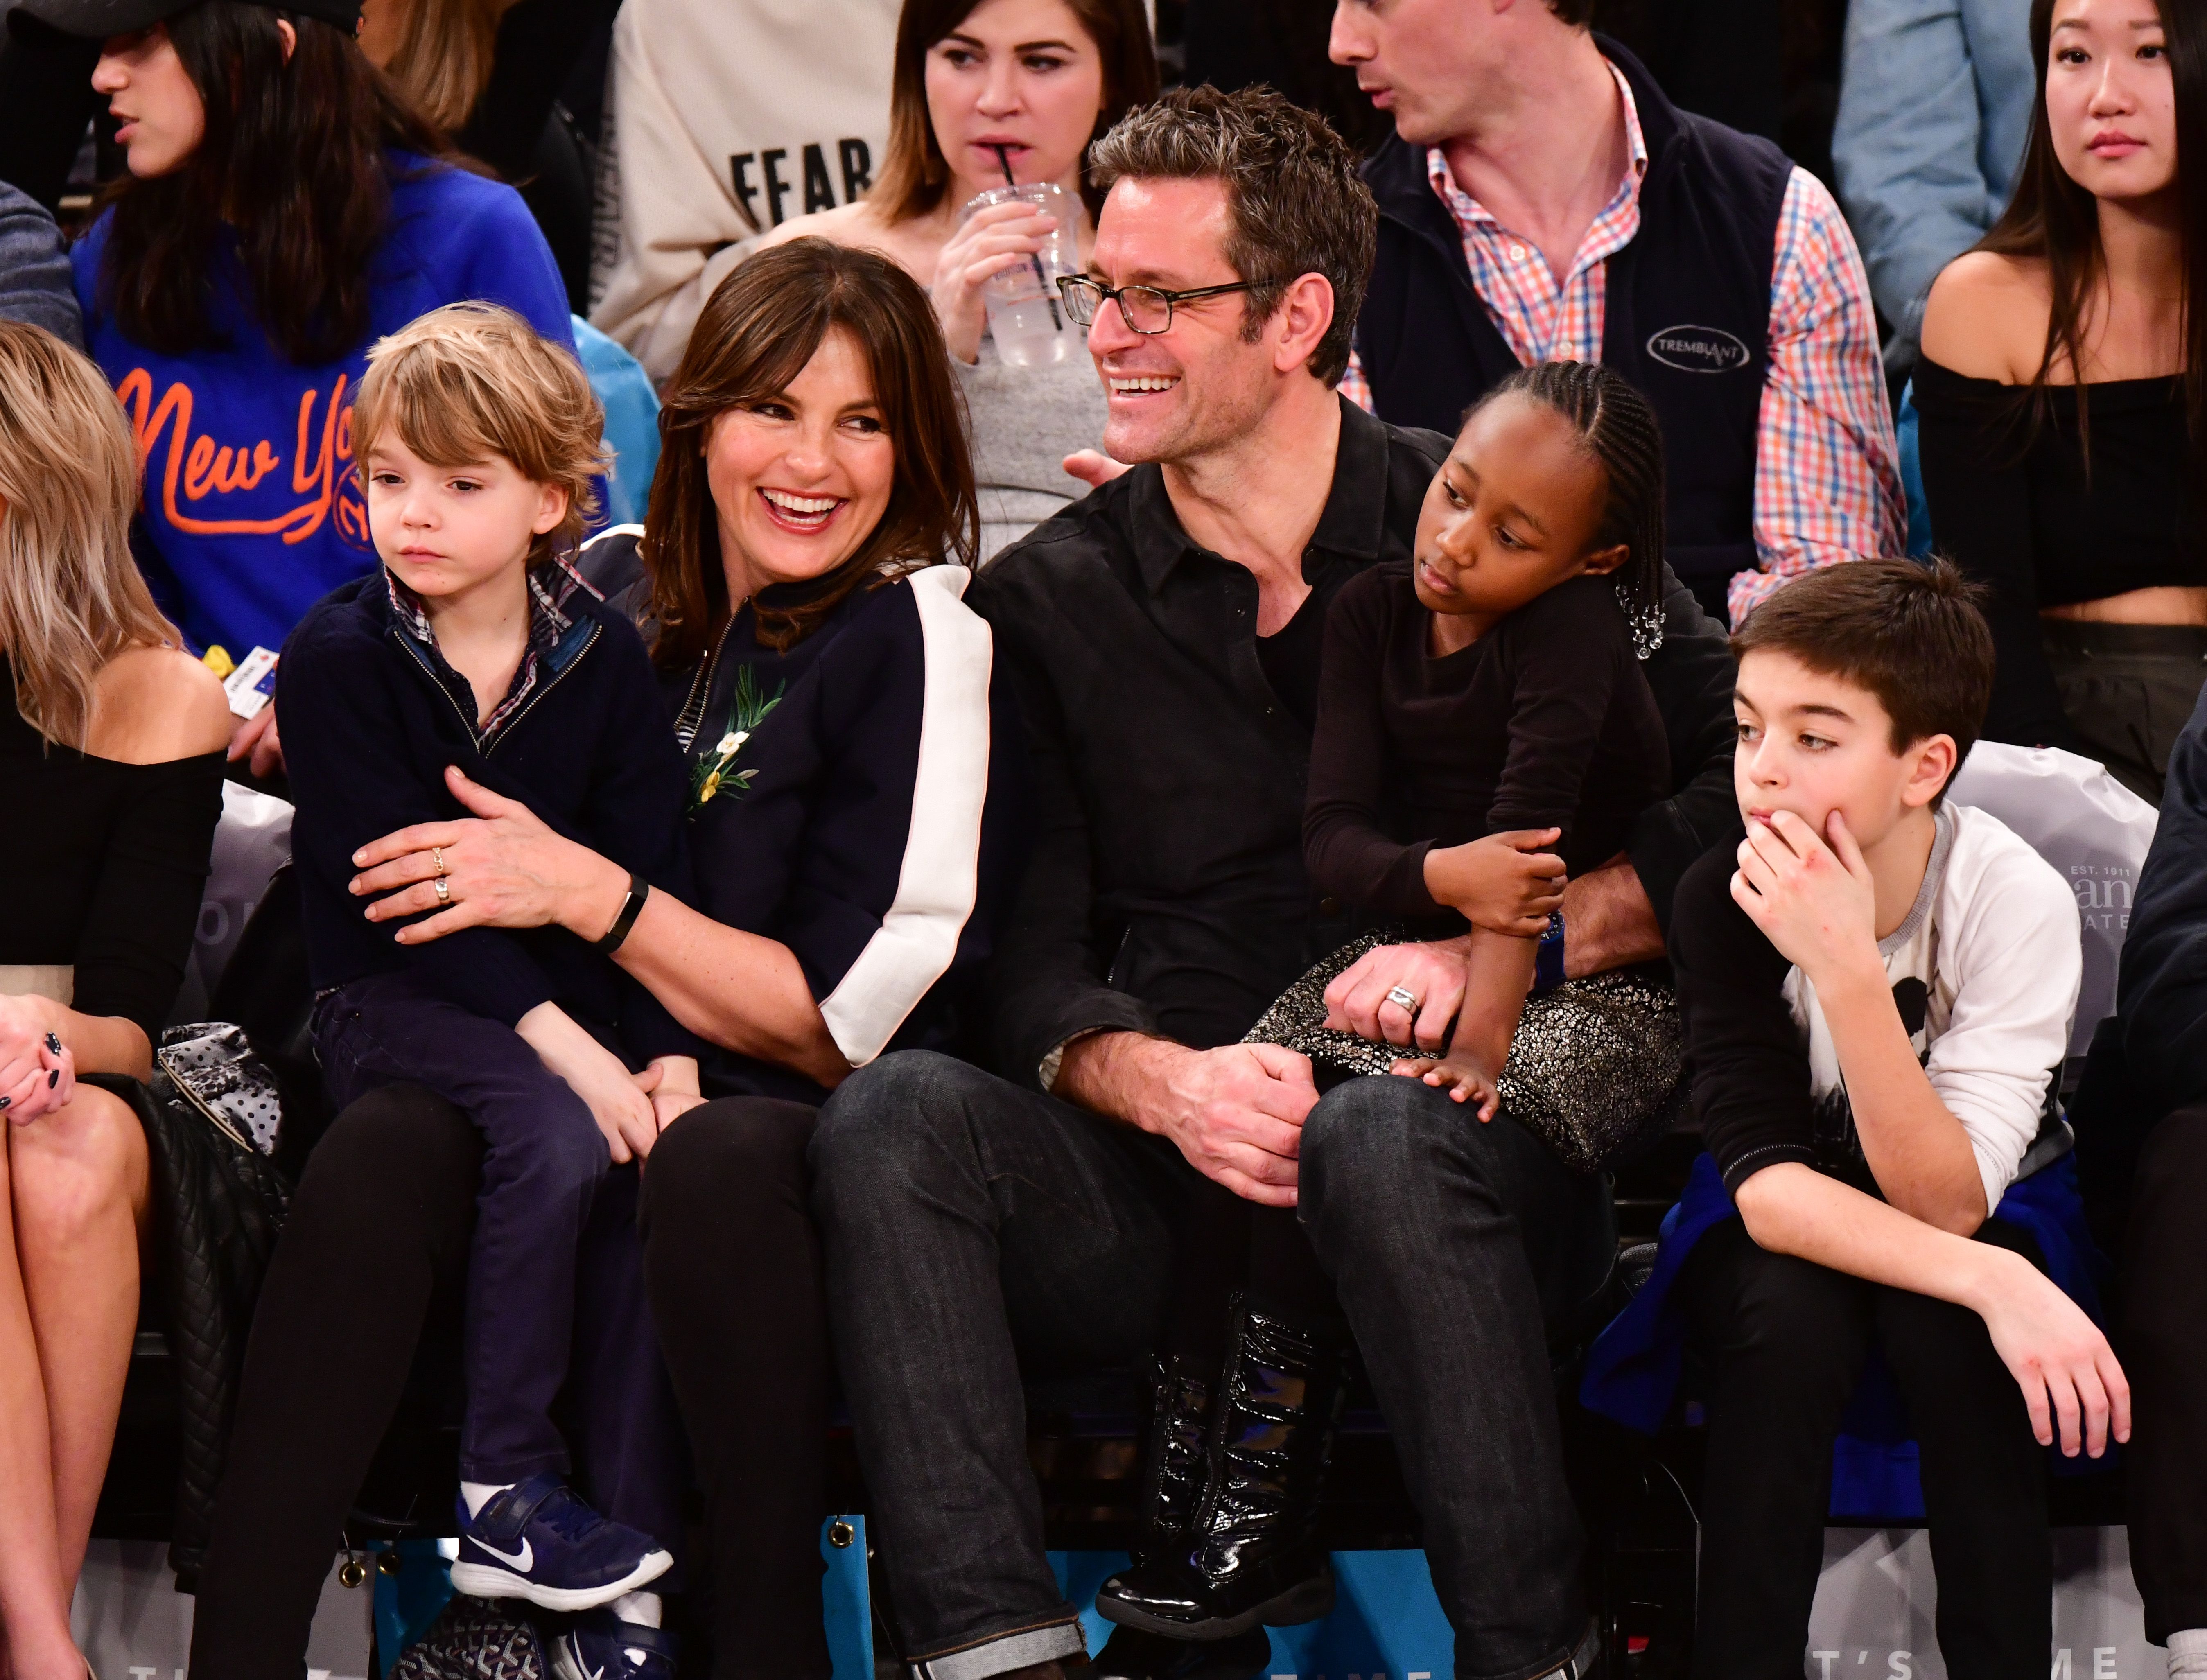 Mariska Hargitay and Peter Hermann sit courtside with their children during an NBA game on February 24, 2018 | Source: Getty Images